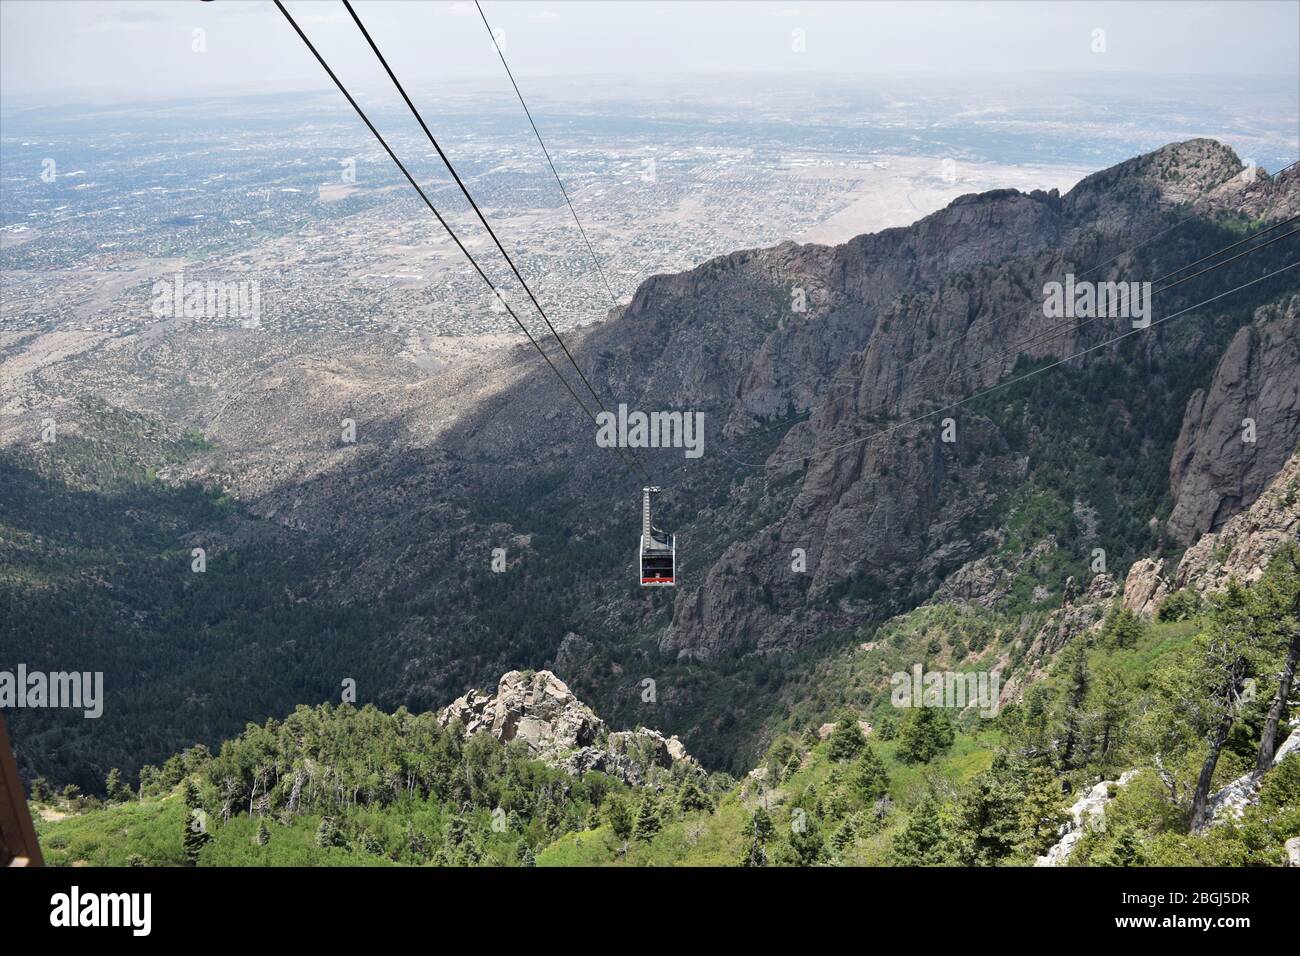 The Sandia Peak tram in Albuquerque New Mexico rises approximately 5,000 feet to the top of the mountain and offers stunning views Stock Photo